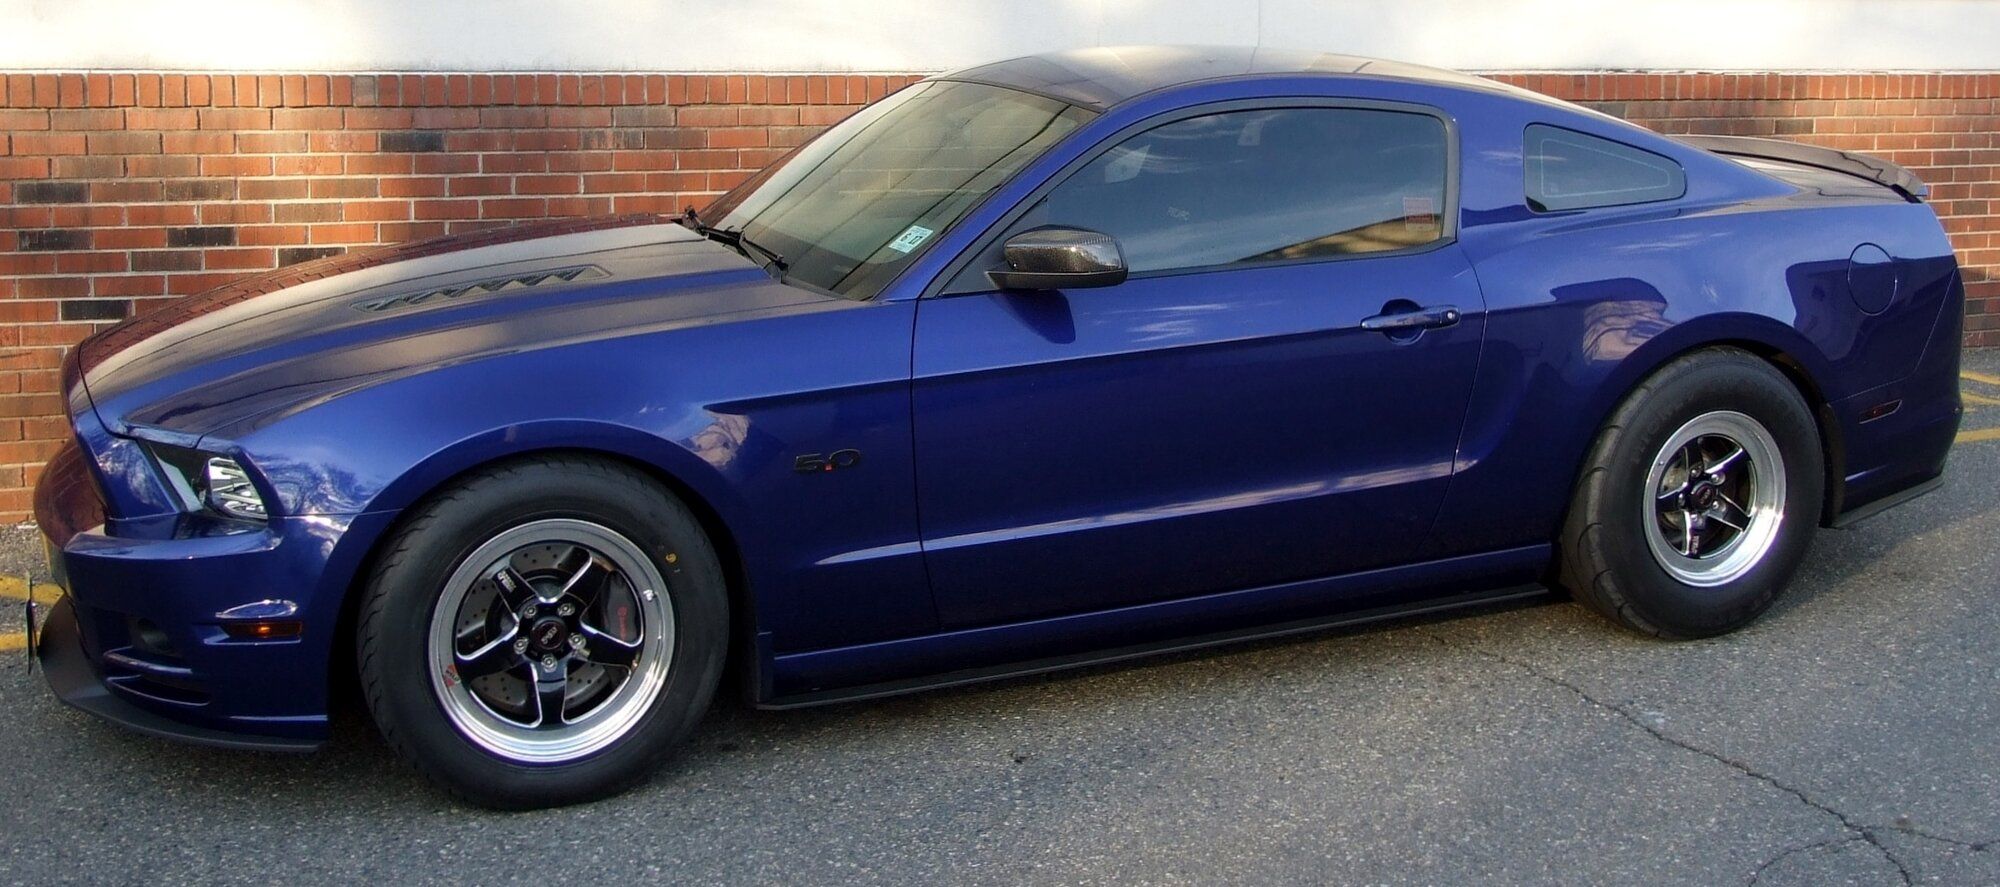 2013 Mustang
GT_50L Drag Race -  (Dave's GT)